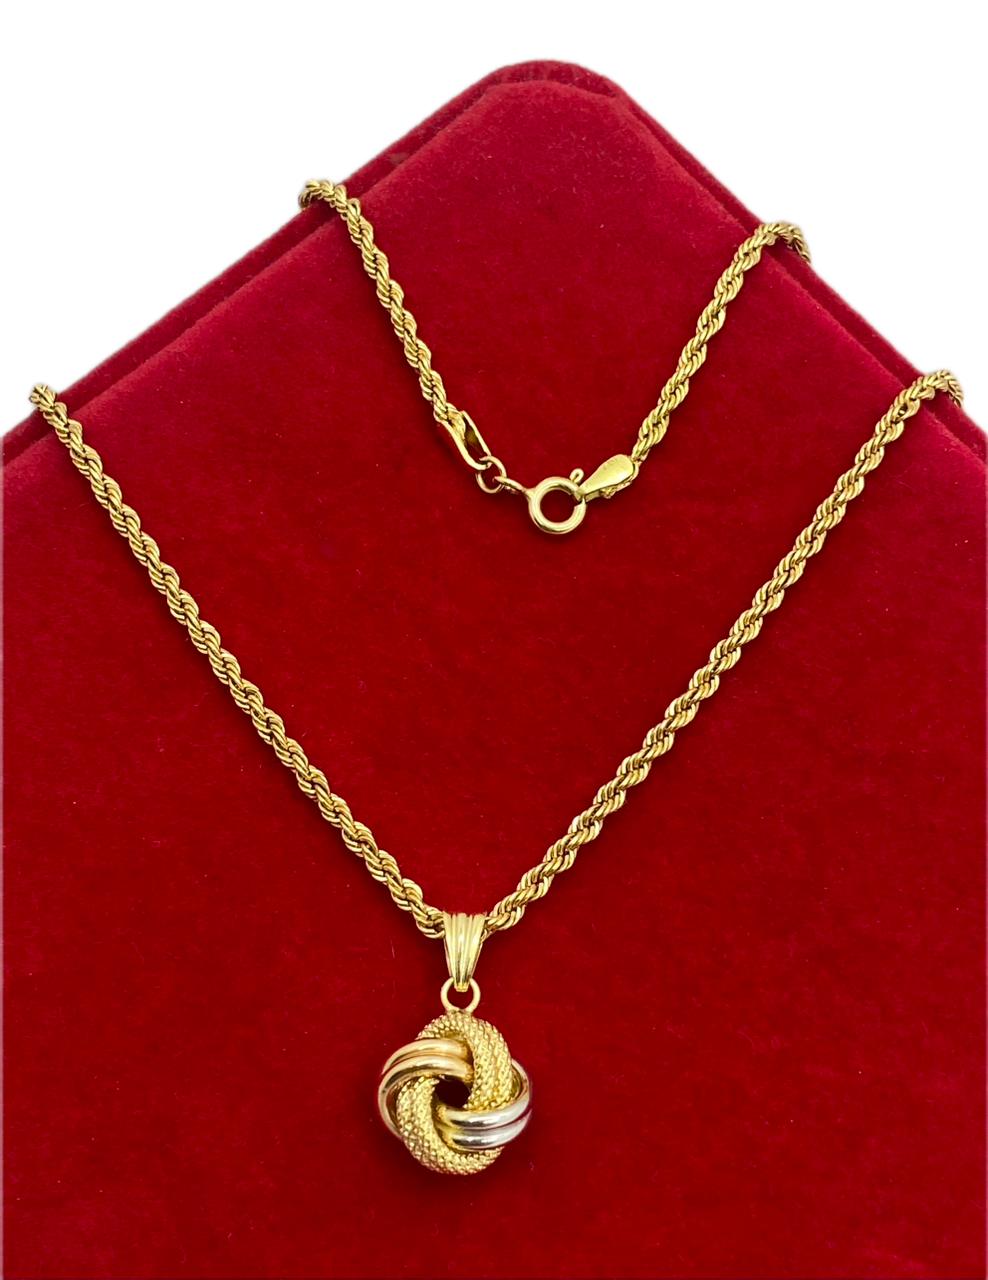 18K Real Saudi Gold Pawnable Rope Necklace 217 – A Pawnable Treasure in Gold Necklaces for Women - Embellish Gold